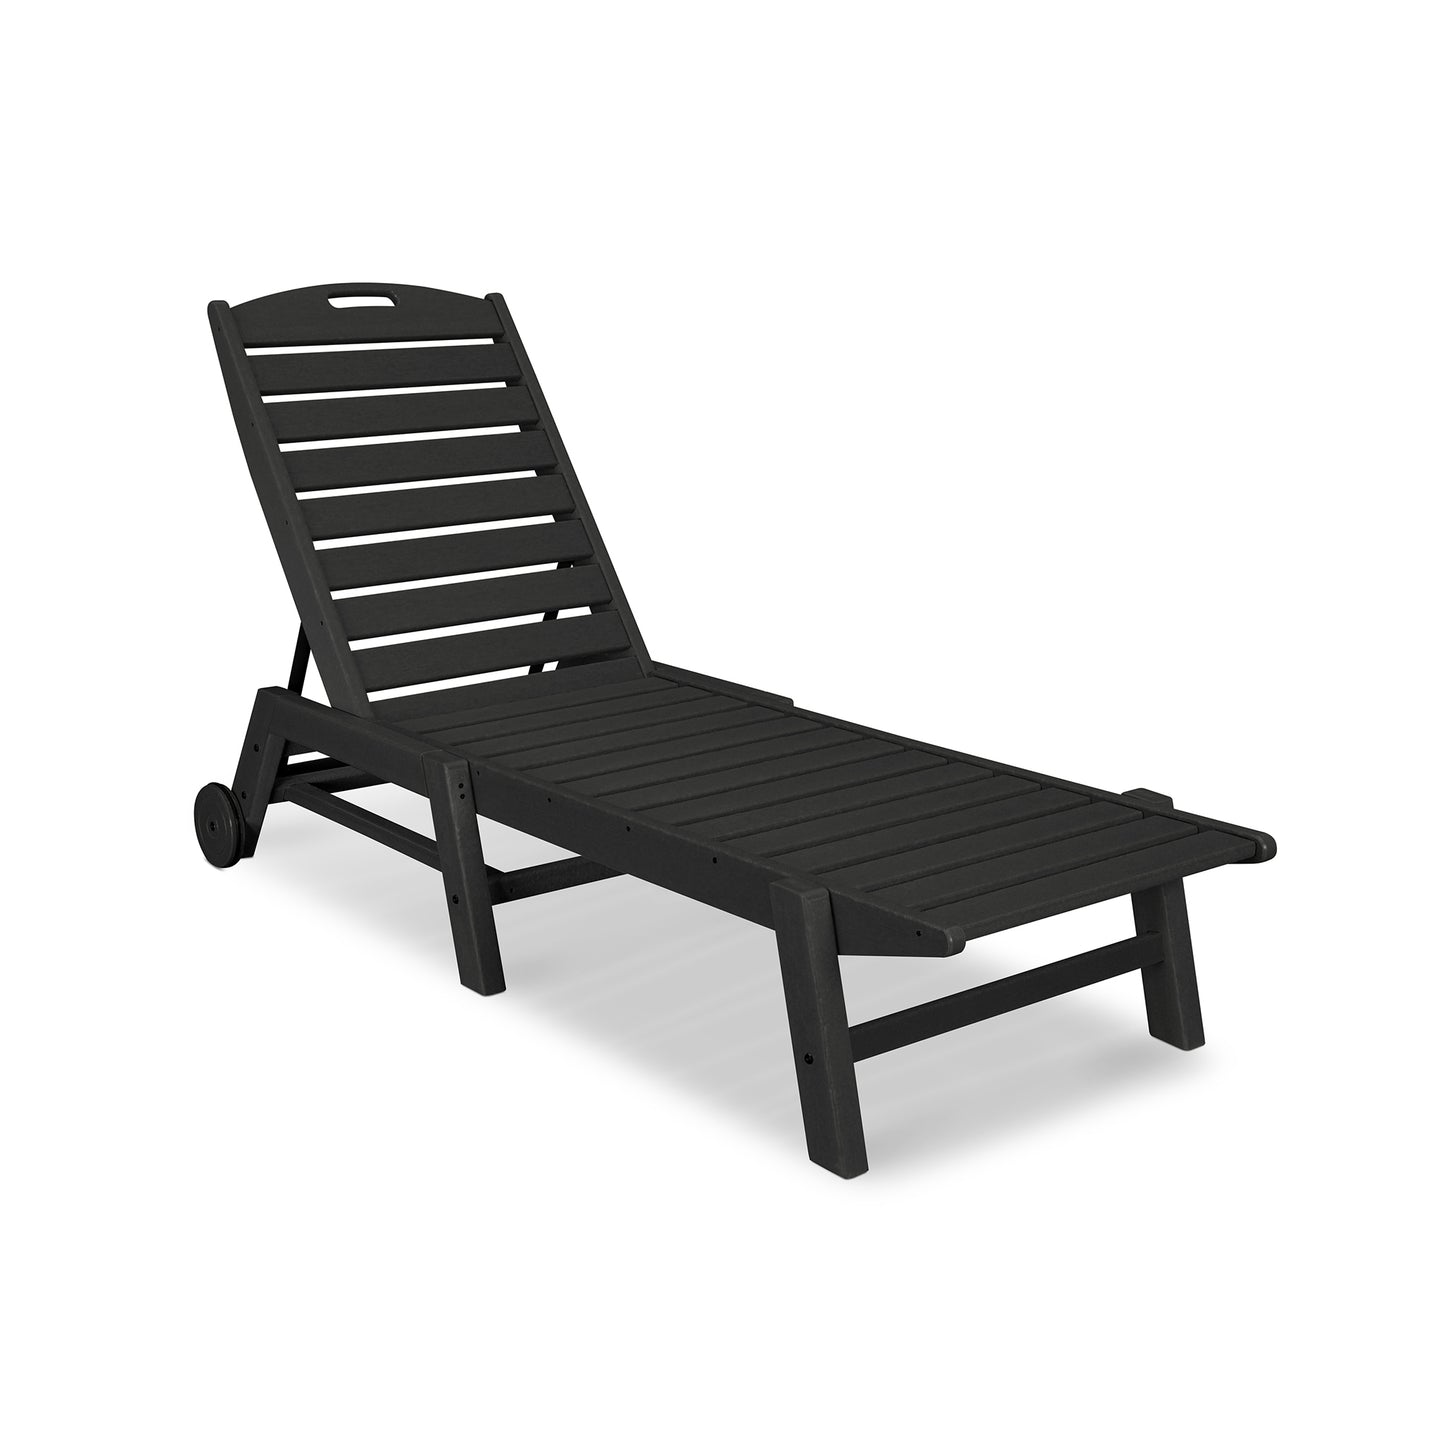 A black, eco-friendly POLYWOOD Nautical Wheeled Chaise - Stackable lounge chair with a reclining back and two small wheels on the rear, positioned on a white background.